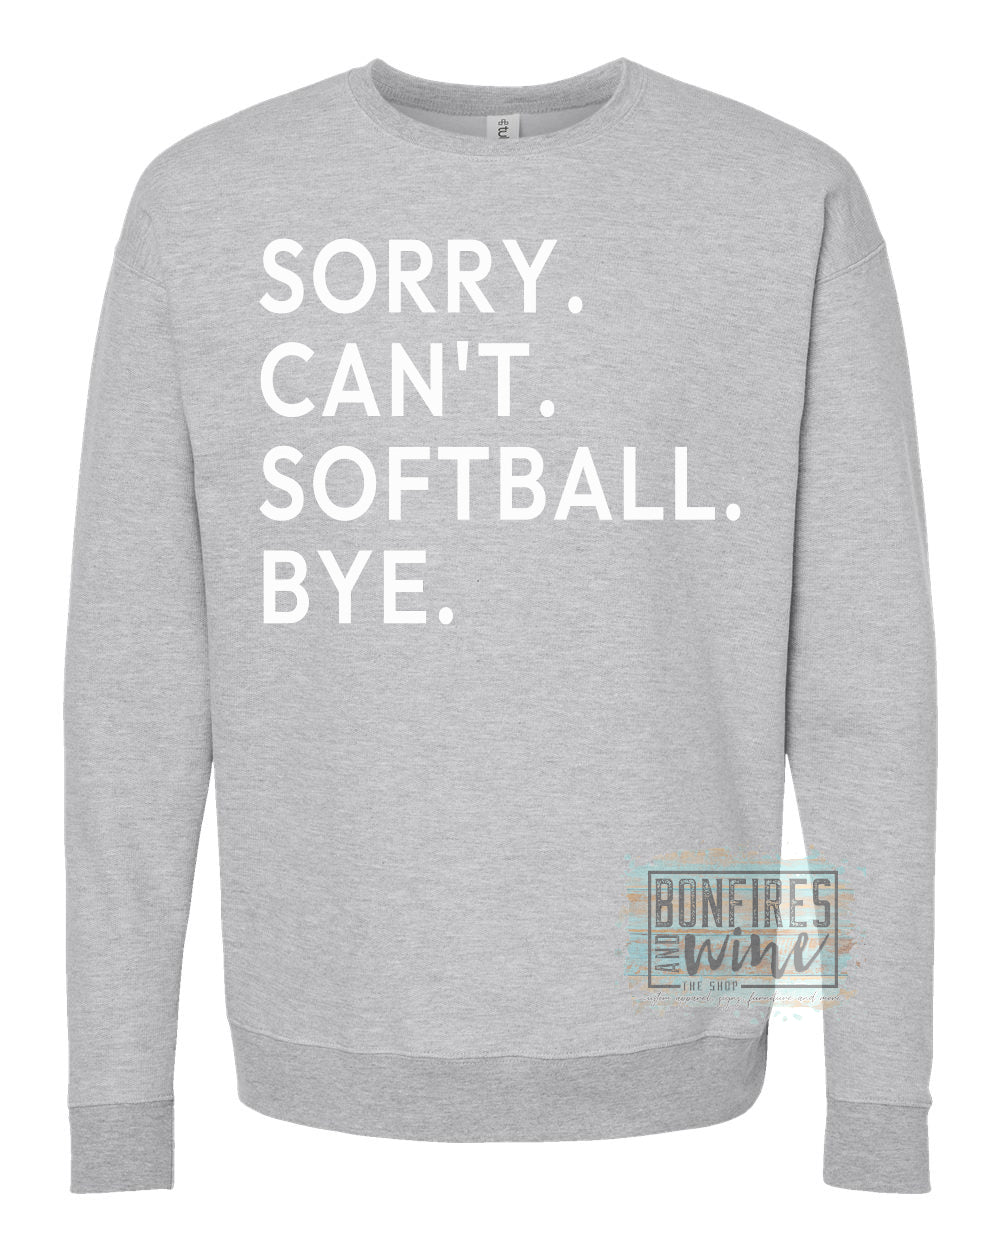 Sorry. Can’t. Softball. Bye.